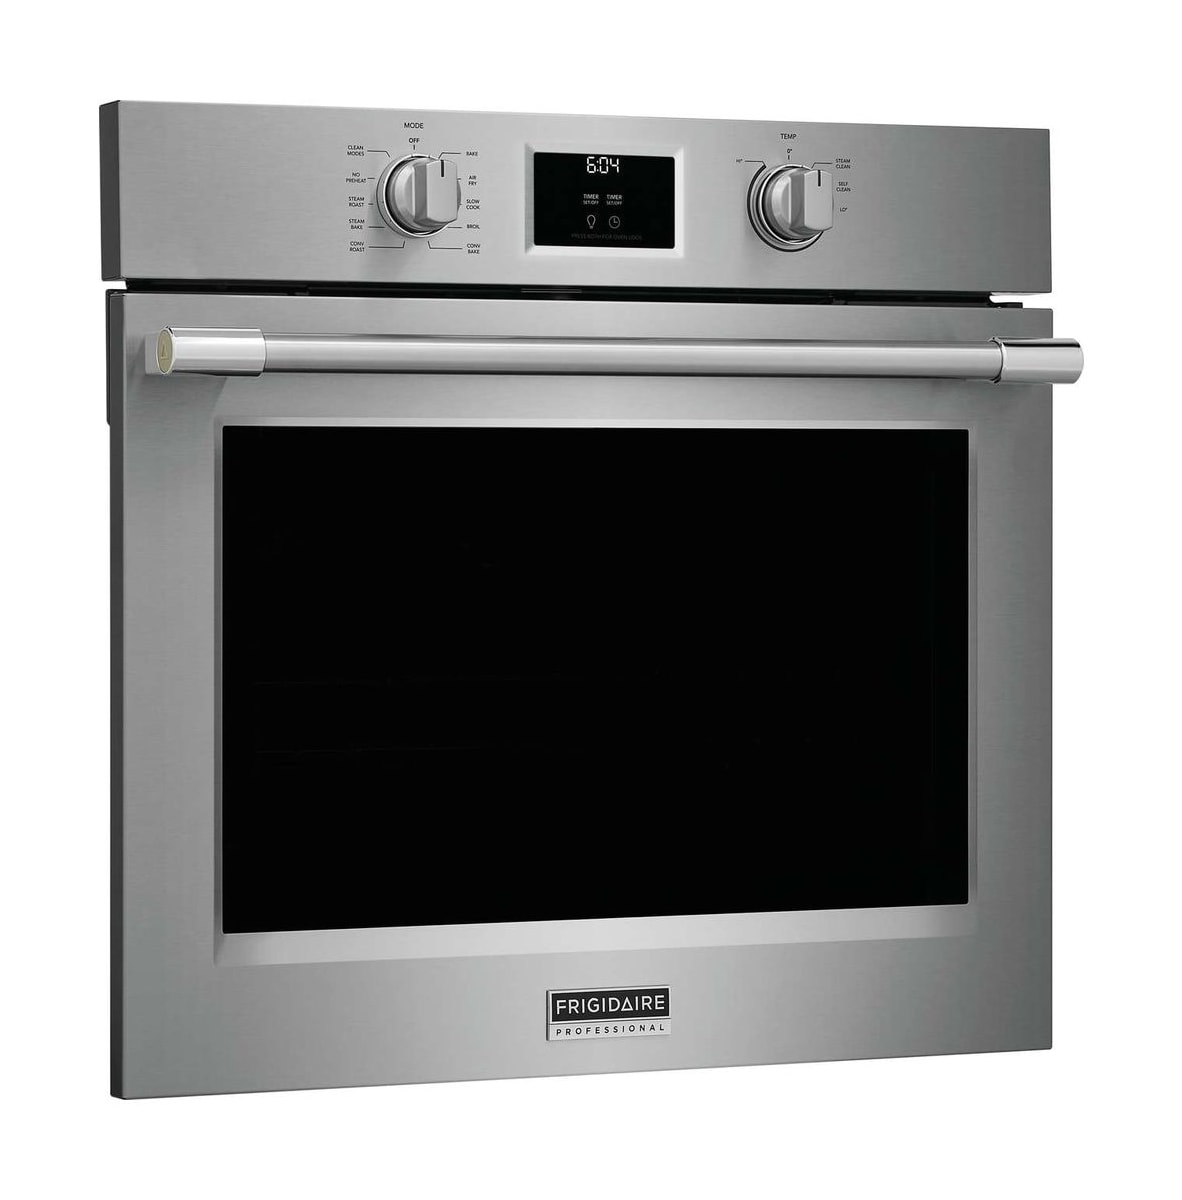 The Best Commercial Ovens :: CompactAppliance.com